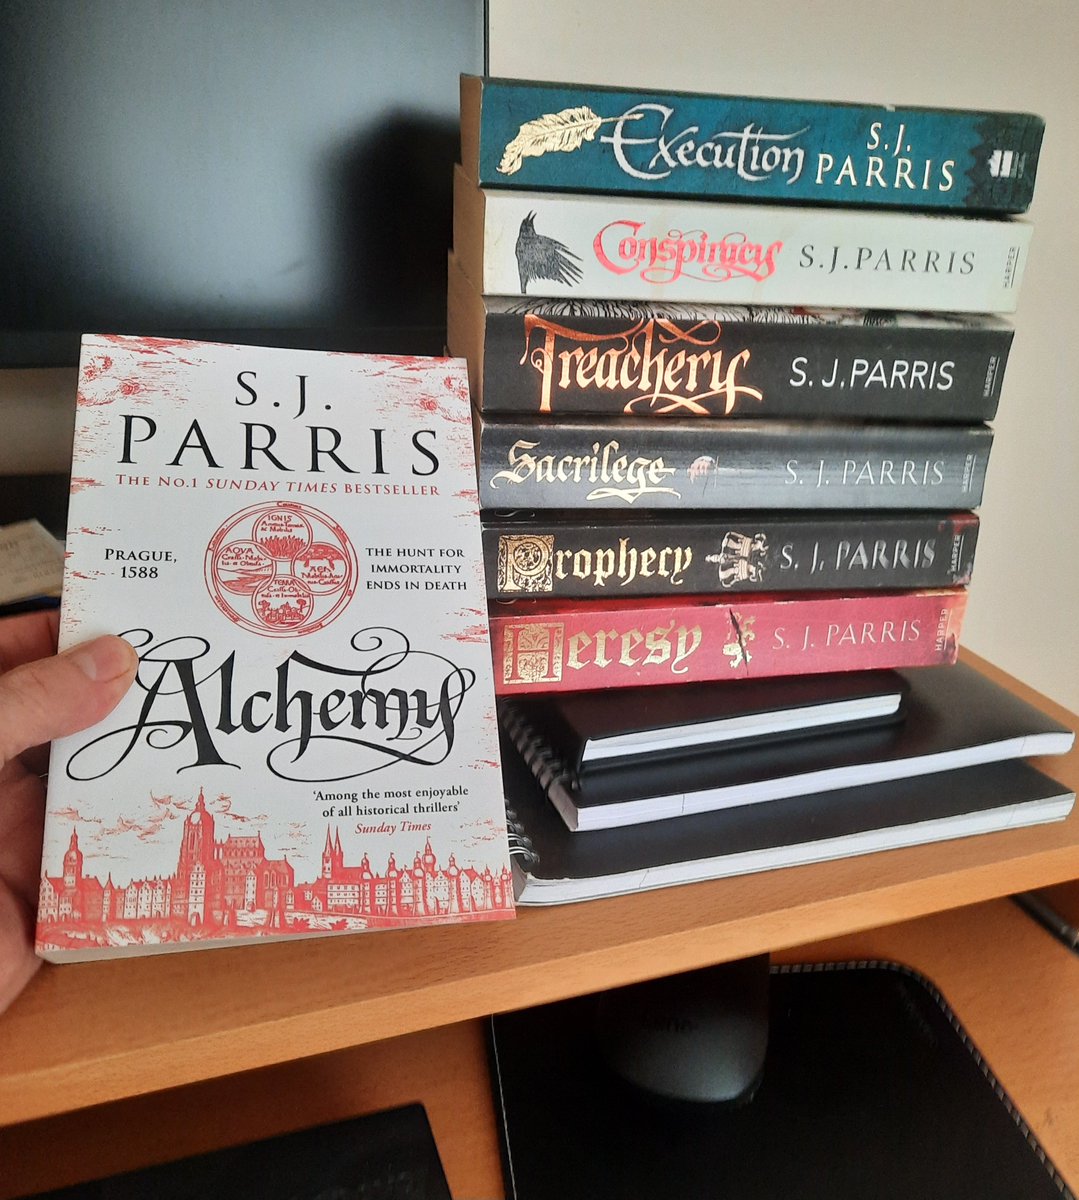 Yes! Alchemy has arrived to bring us up to date with the BRILLIANT Giordano Bruno series by @thestephmerritt writing as SJParris. We love her books - I can't wait to start this one tonight!